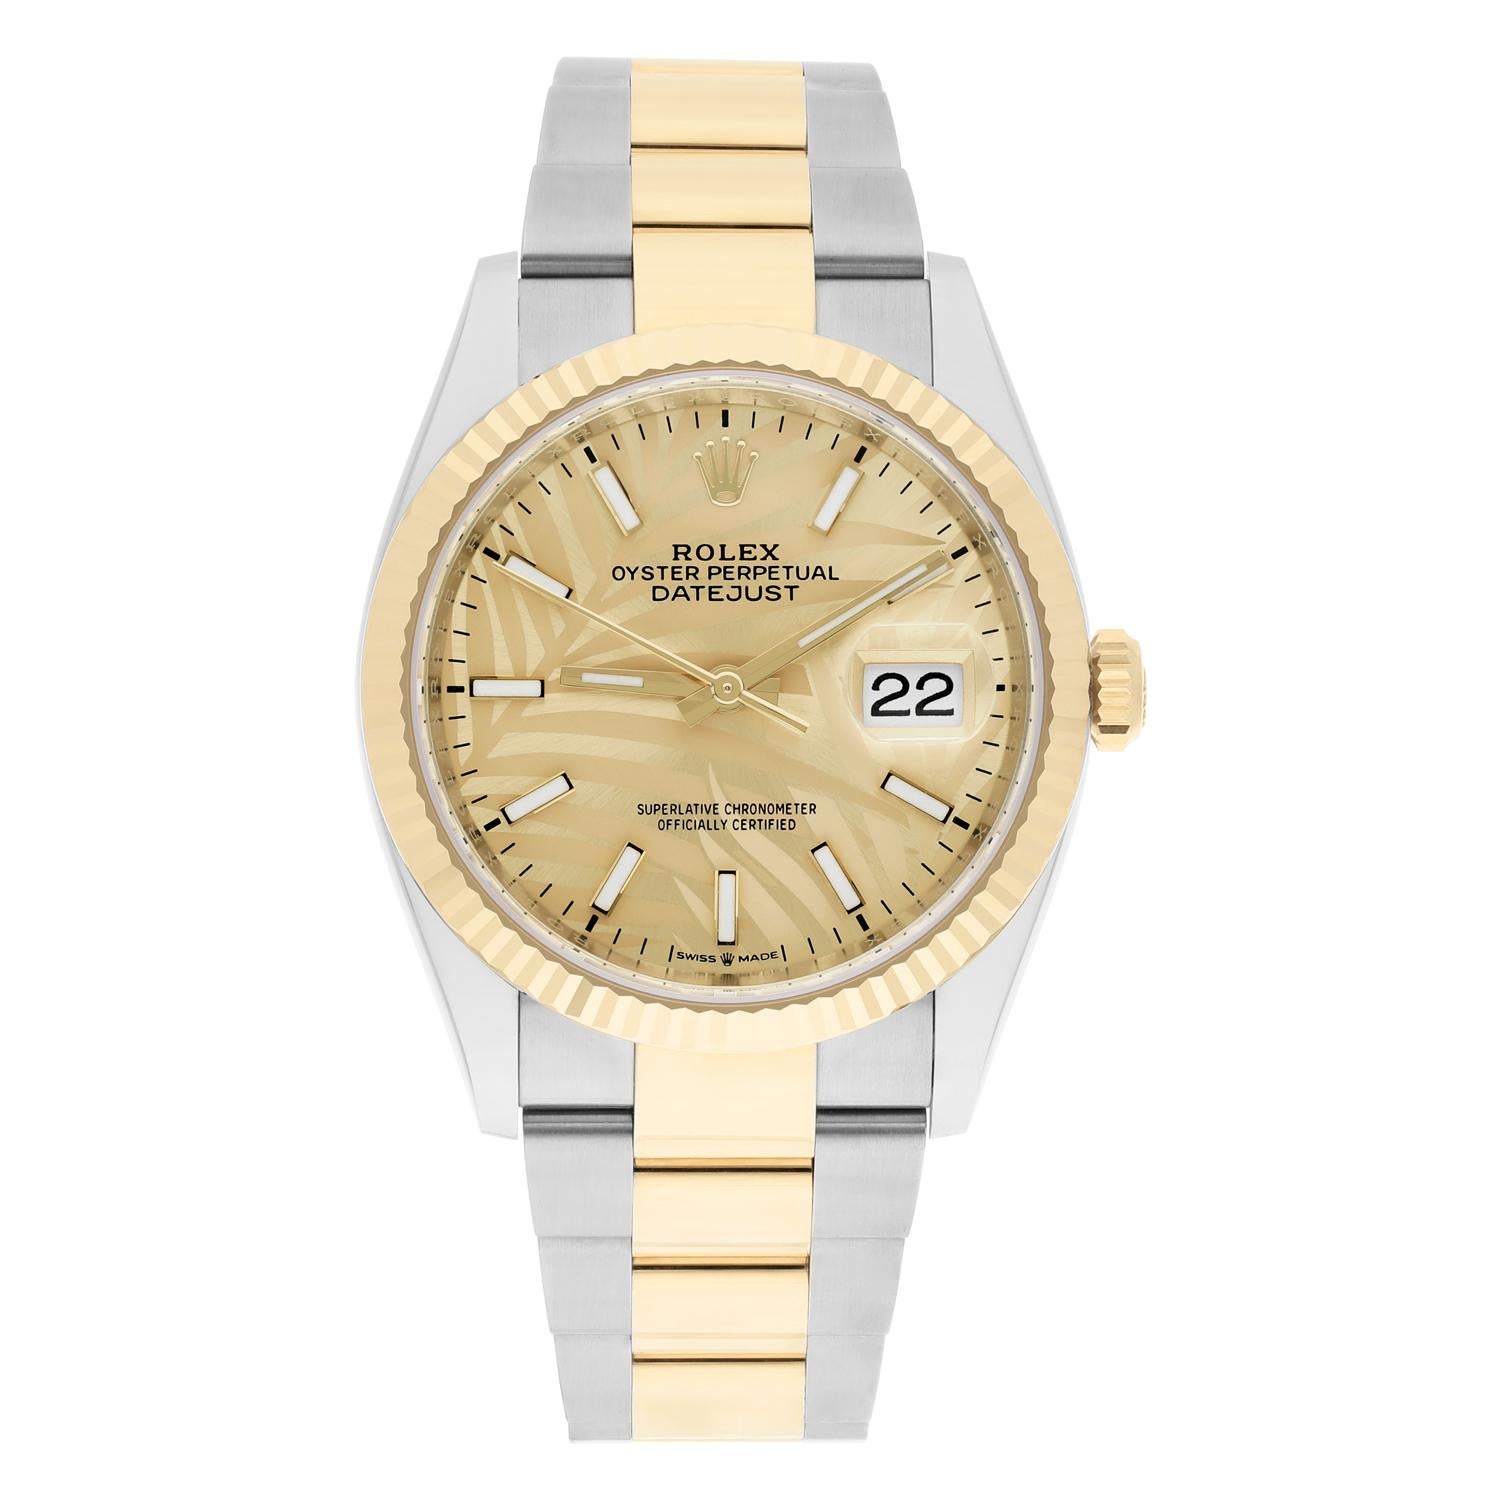 Rolex Datejust Steel and Yellow Gold, Golden Palm Dial Mens Watch 126233 Unworn. Officially certified chronometer self-winding movement. Stainless steel and 18K yellow gold case 36.0 mm in diameter. Rolex logo on a crown. 18K yellow gold fluted